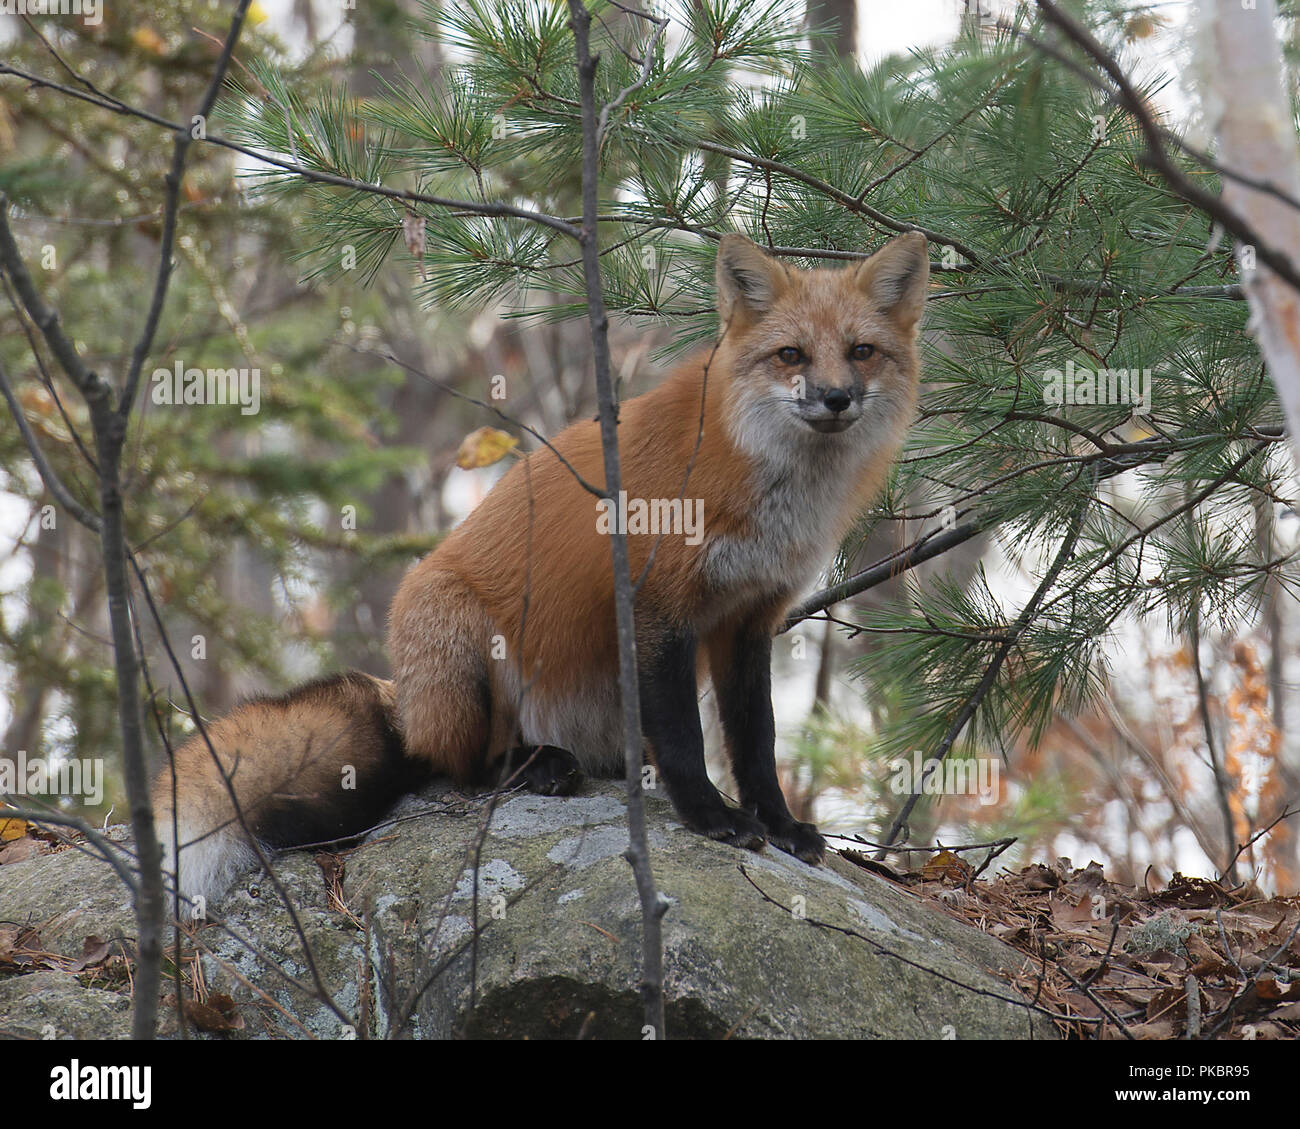 Fox Red Fox animal in the forest  sitting on a rock with background of foliage and trees. Stock Photo